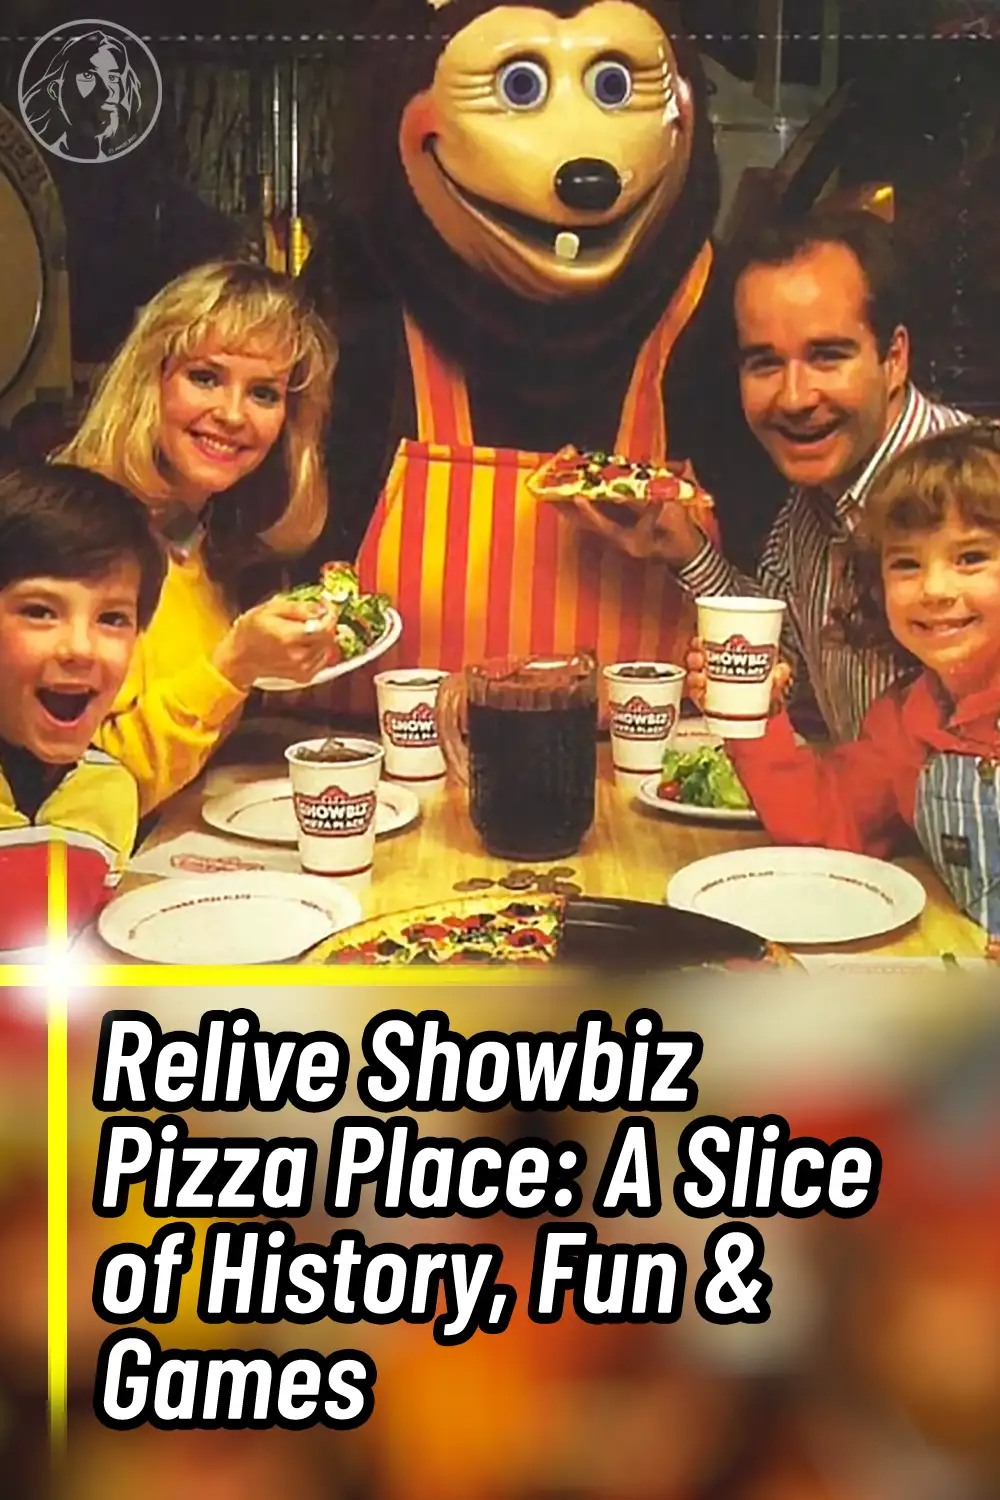 Relive Showbiz Pizza Place: A Slice of History, Fun & Games